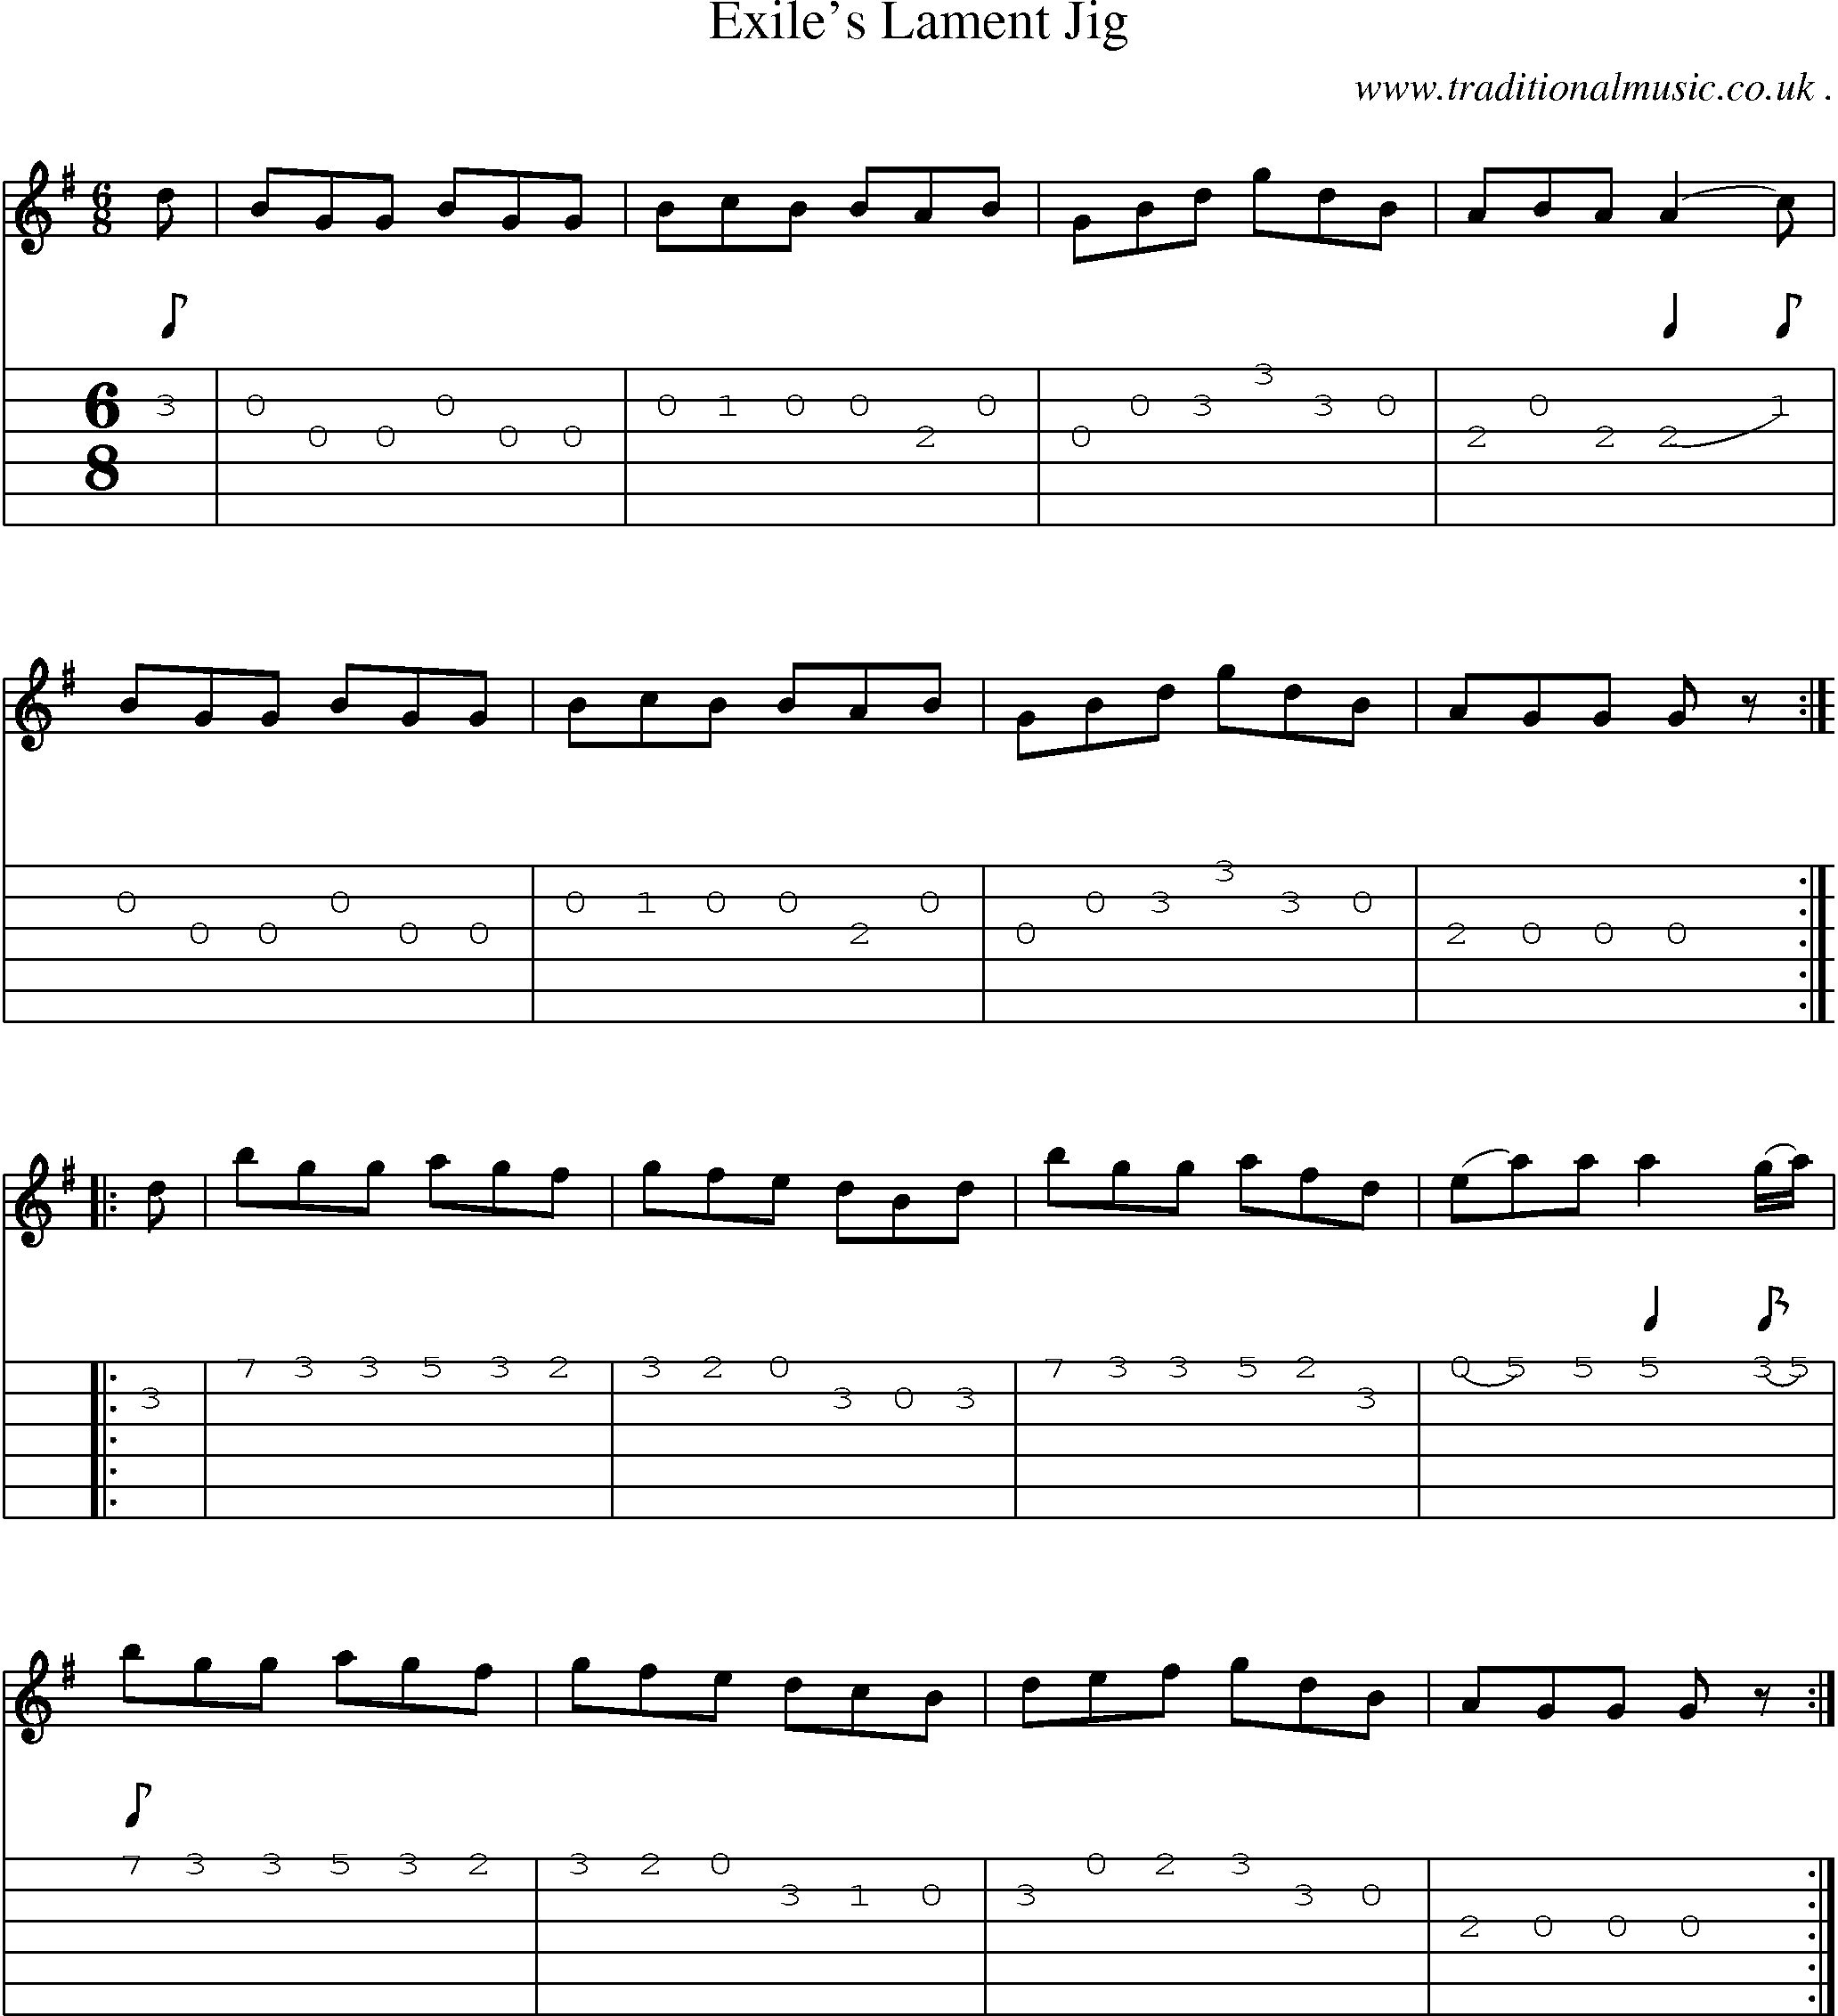 Sheet-Music and Guitar Tabs for Exiles Lament Jig